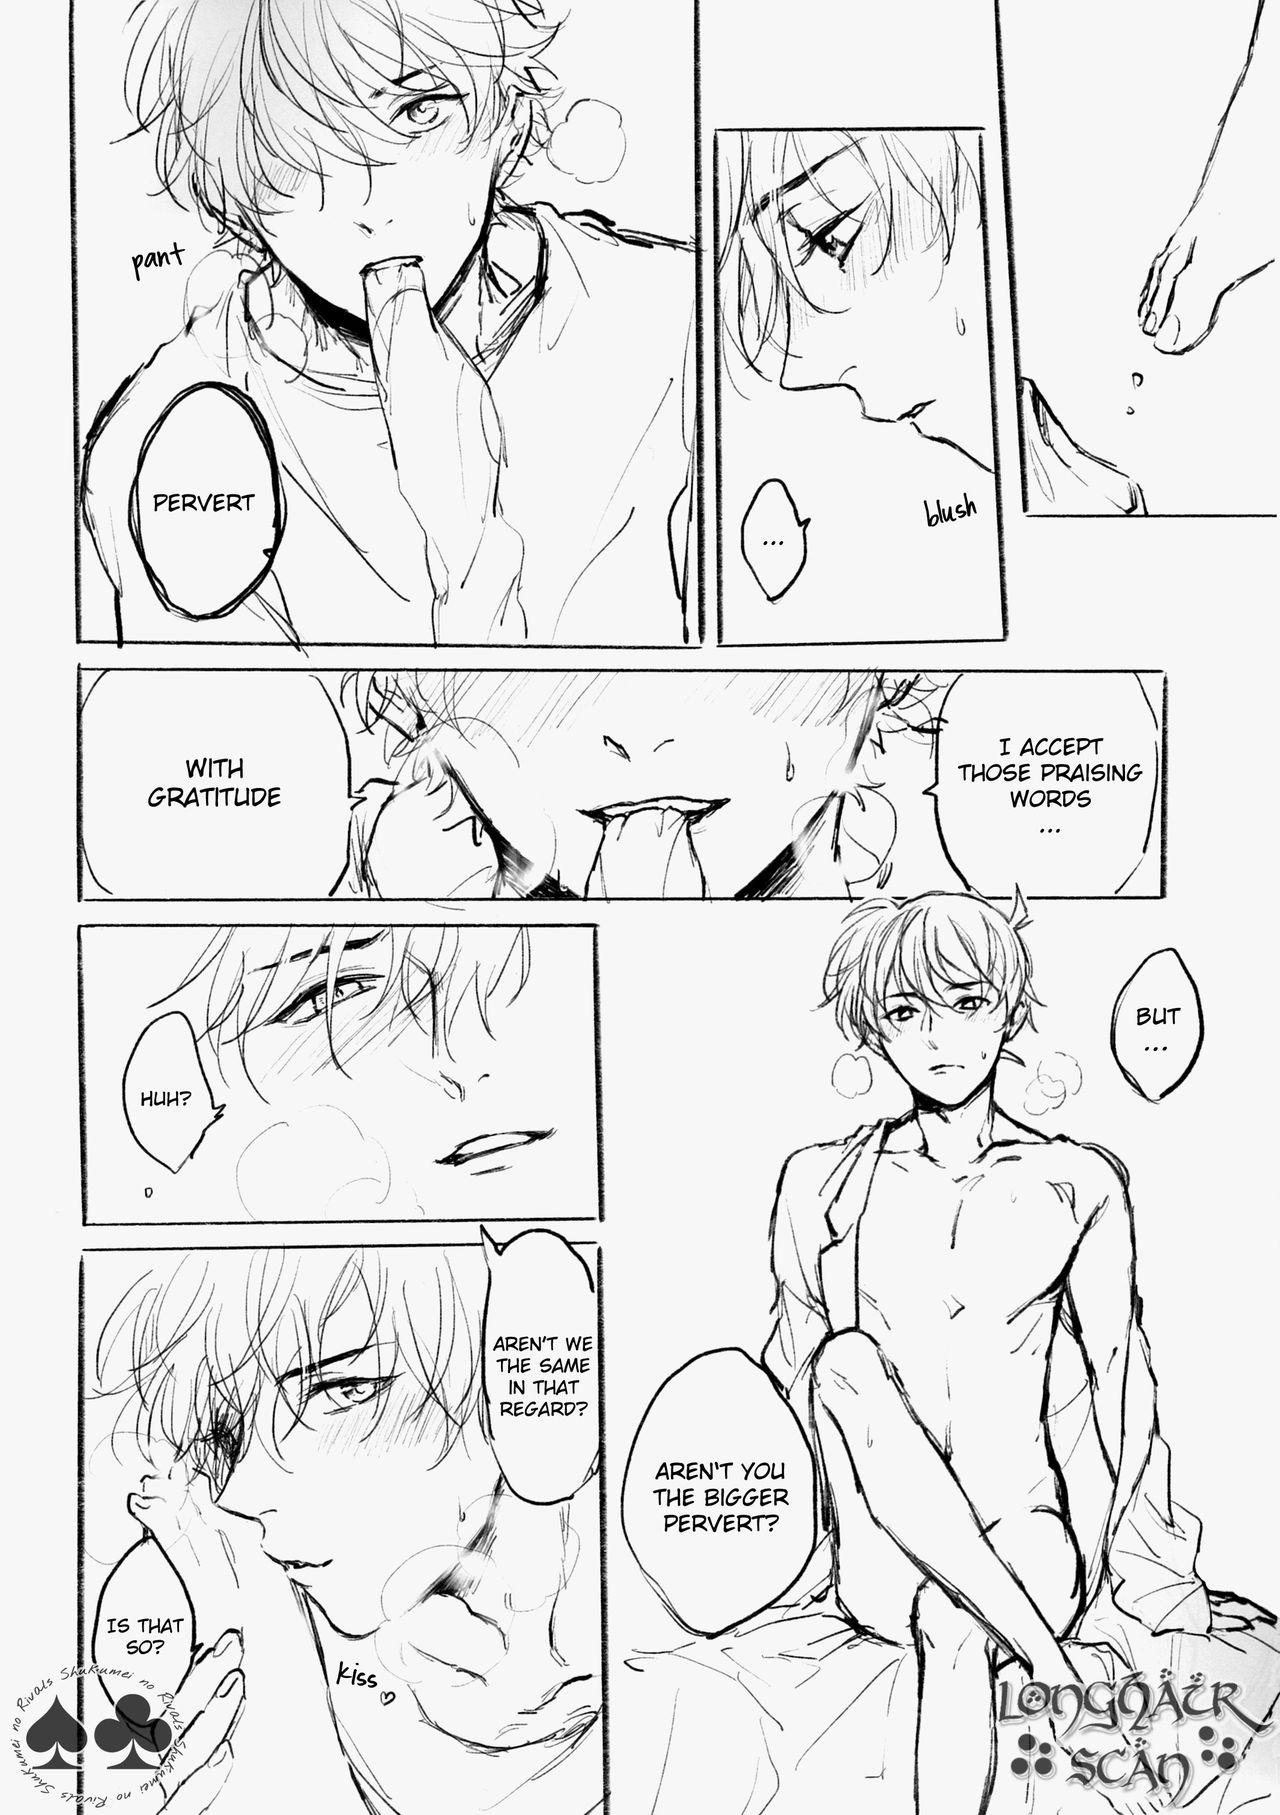 Female Domination WALLOW - Detective conan Gay Brownhair - Page 4